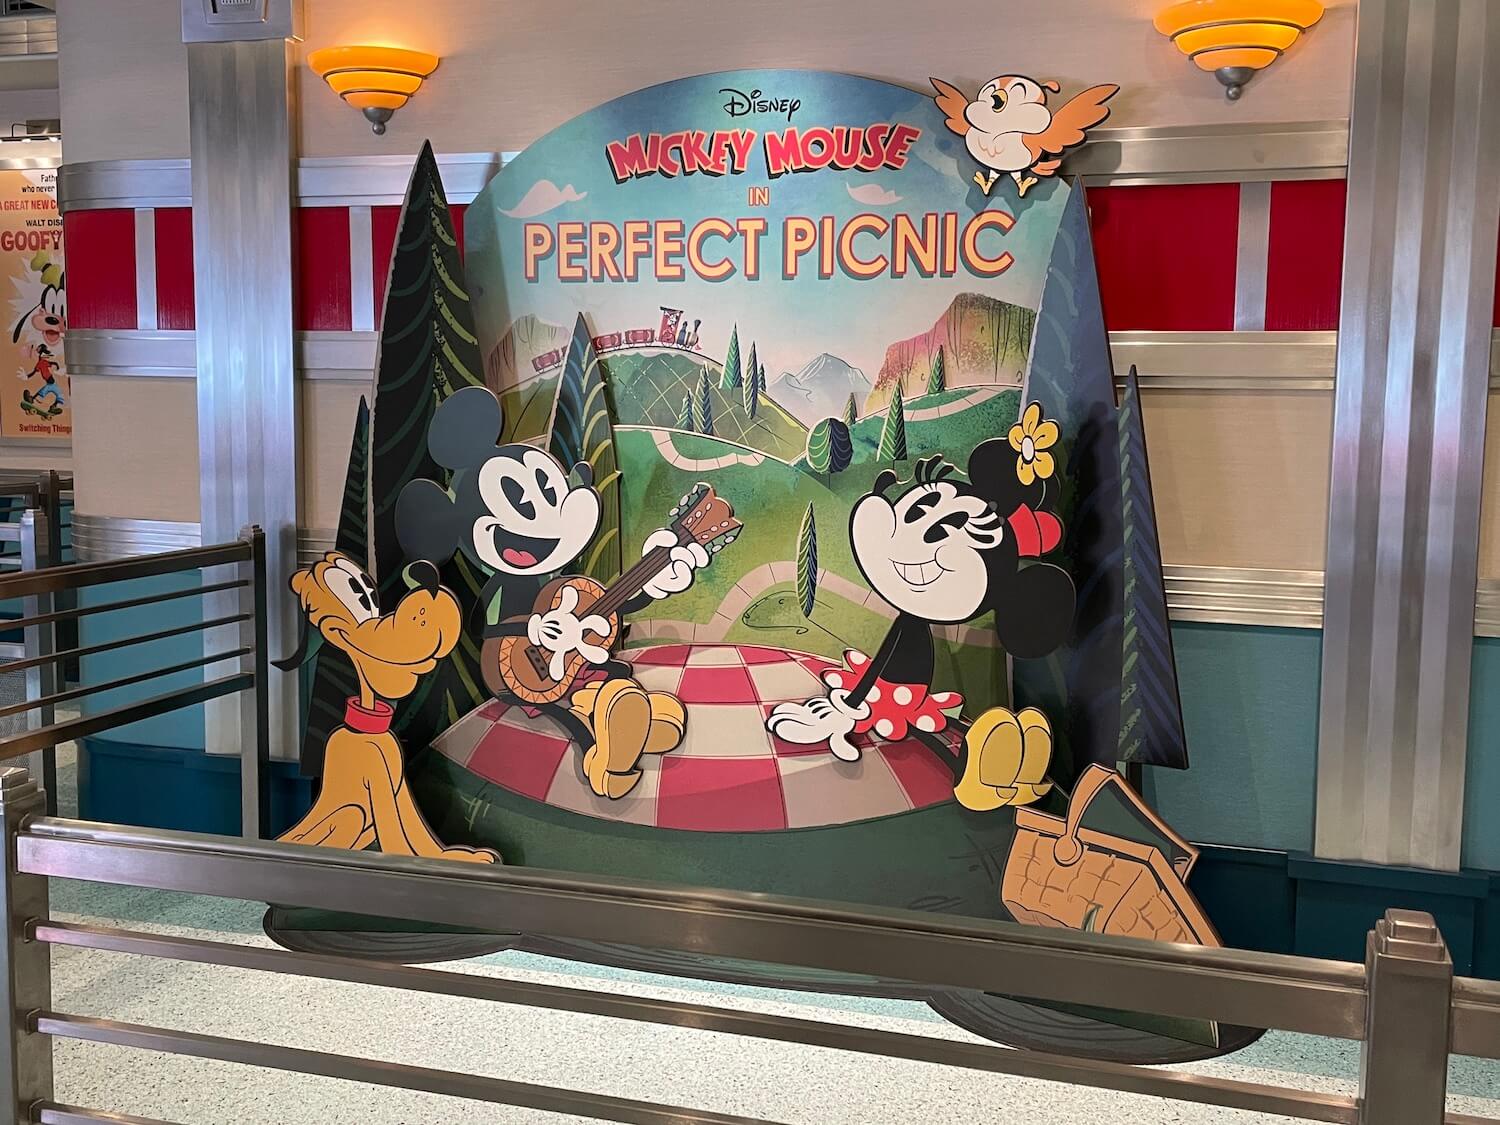 A flat, movie theater-style display at the entrance to the ride, which is also themed like a movie theater. It's Mickey, Minney, and Pluto on a picnic blanket in a verdant park. Above them it says “Mickey Mouse in Perfect Picnic,” and we see Goofy conducting a steam train on the horizon.